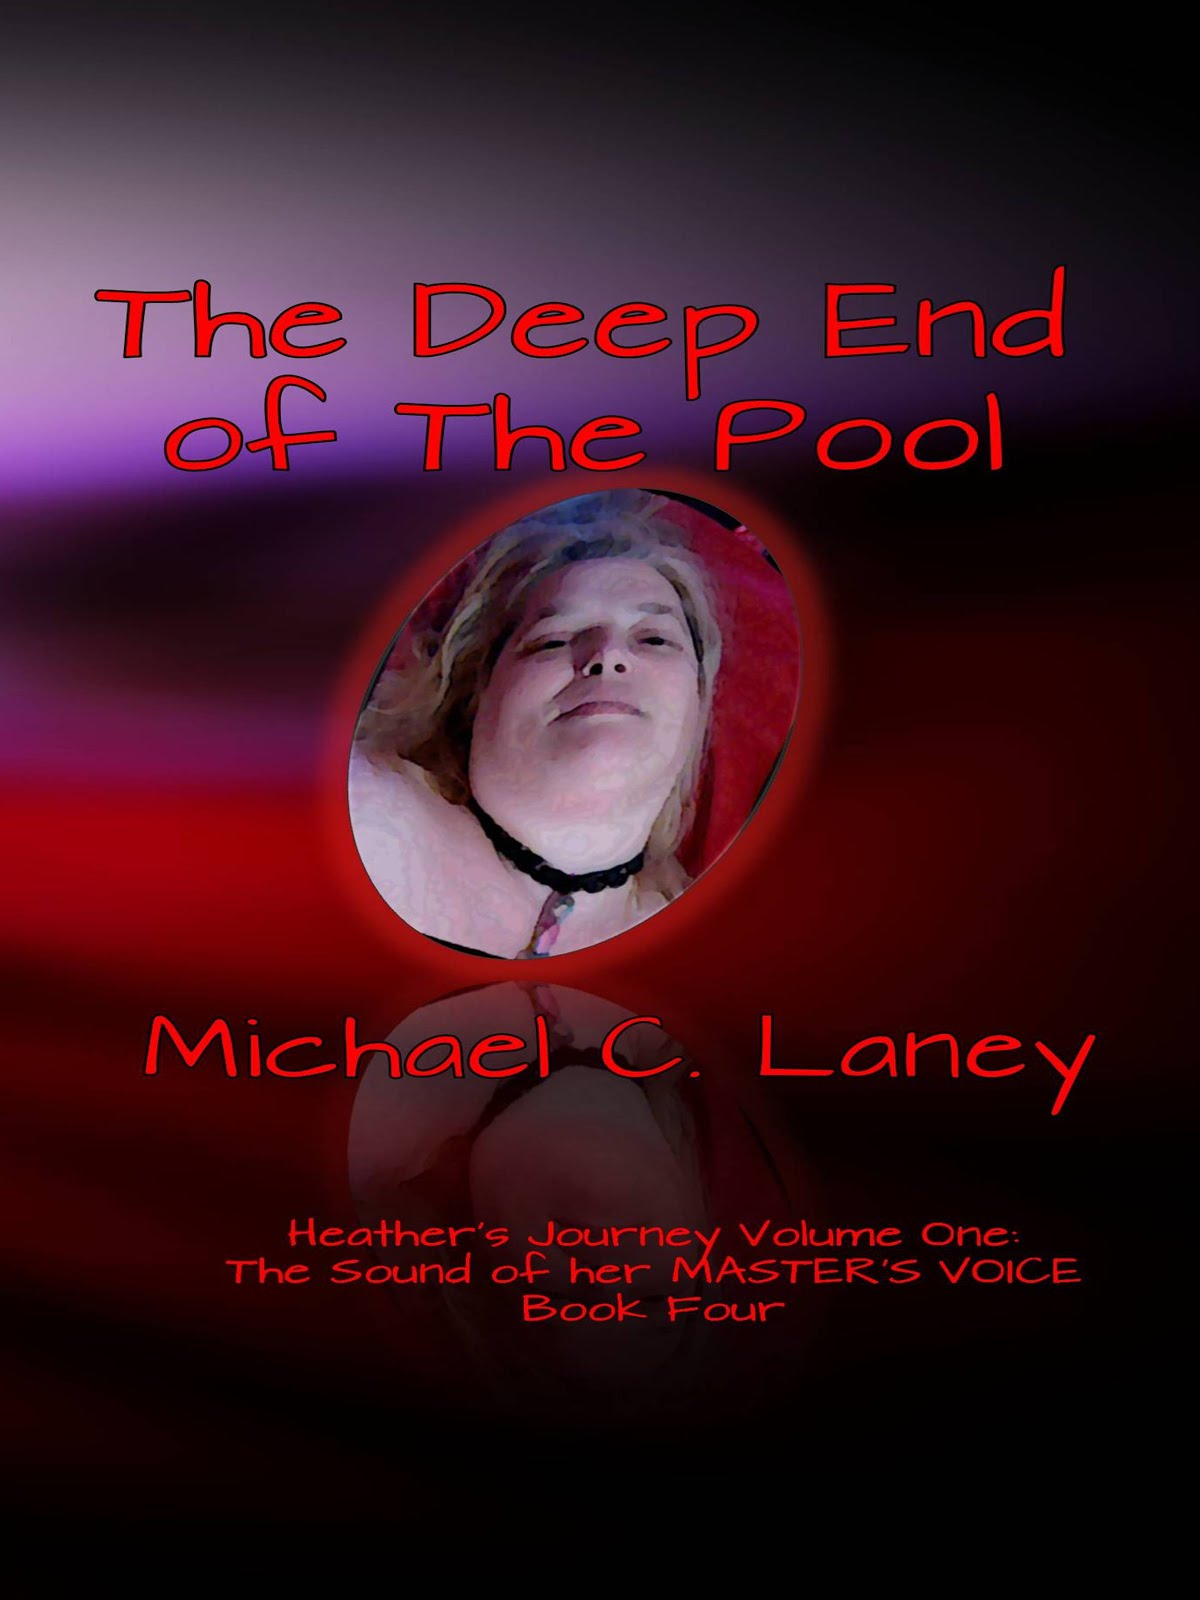 New Release! The Deep End of the Pool